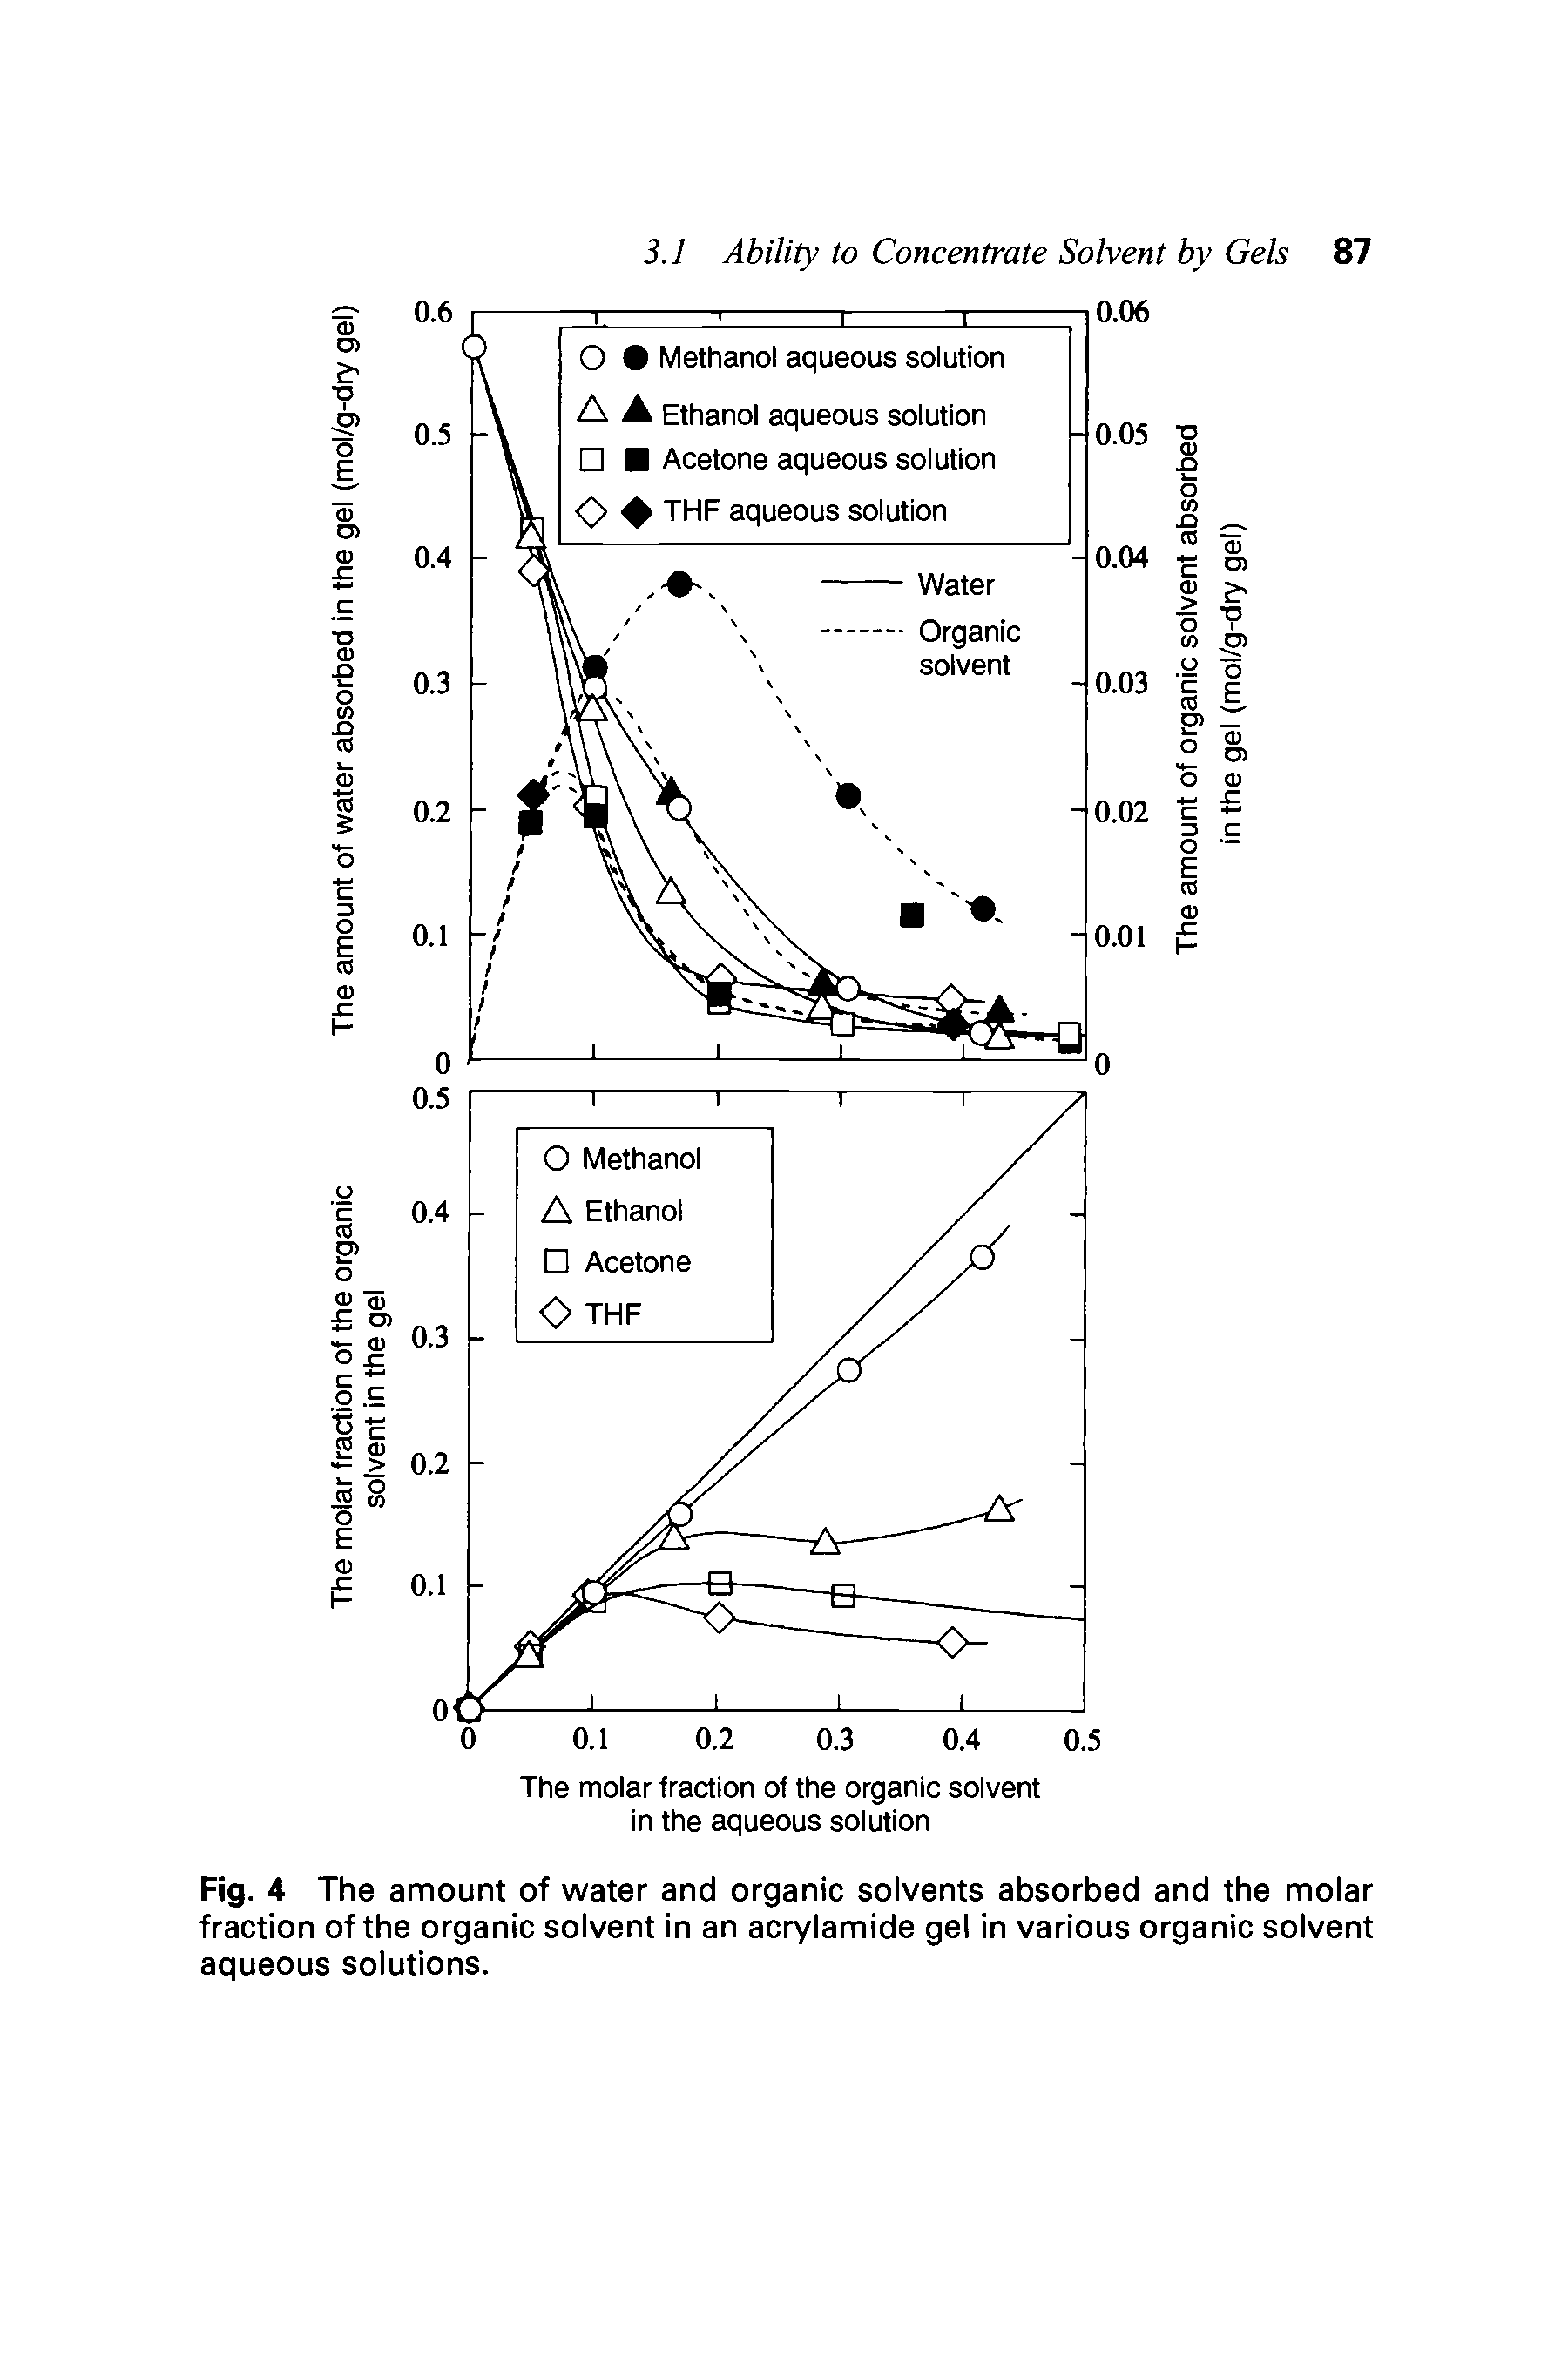 Fig. 4 The amount of water and organic solvents absorbed and the molar fraction of the organic solvent in an acrylamide gel in various organic solvent aqueous solutions.